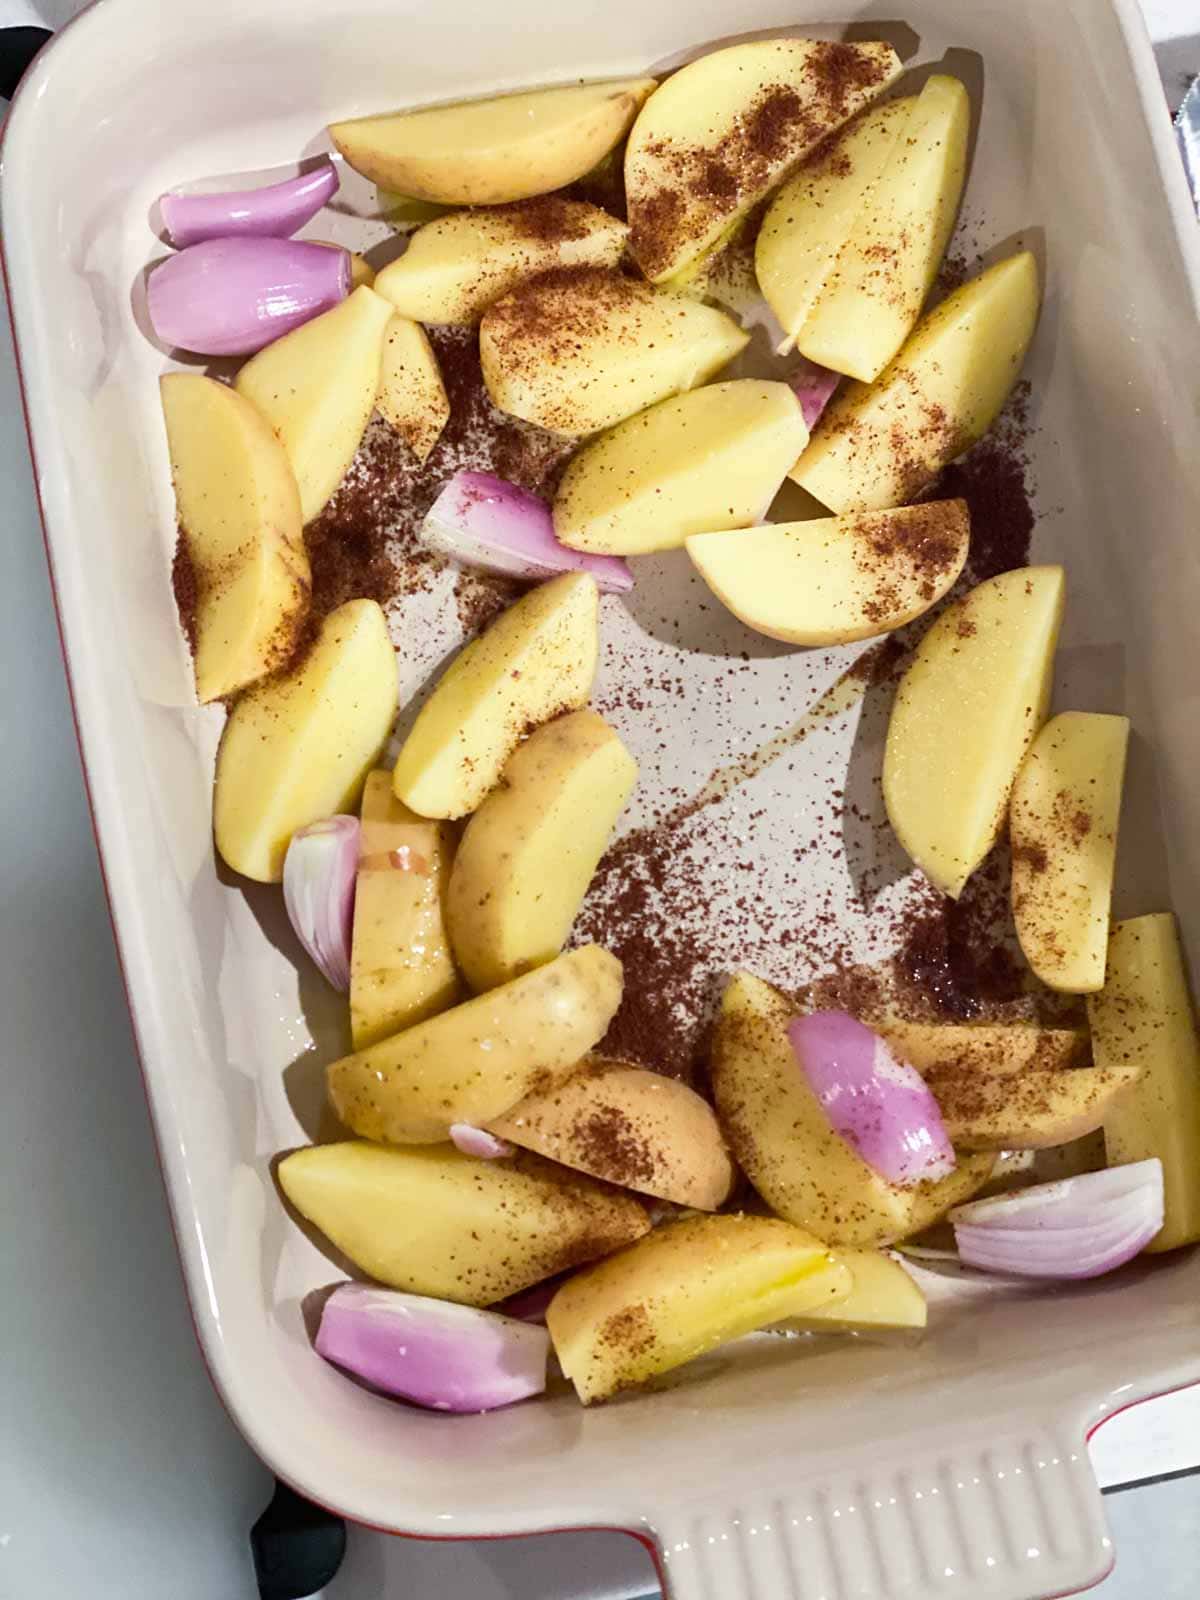 A mixture of wedge potatoes and shallots covered in sumac and olive oil in a roasting pan